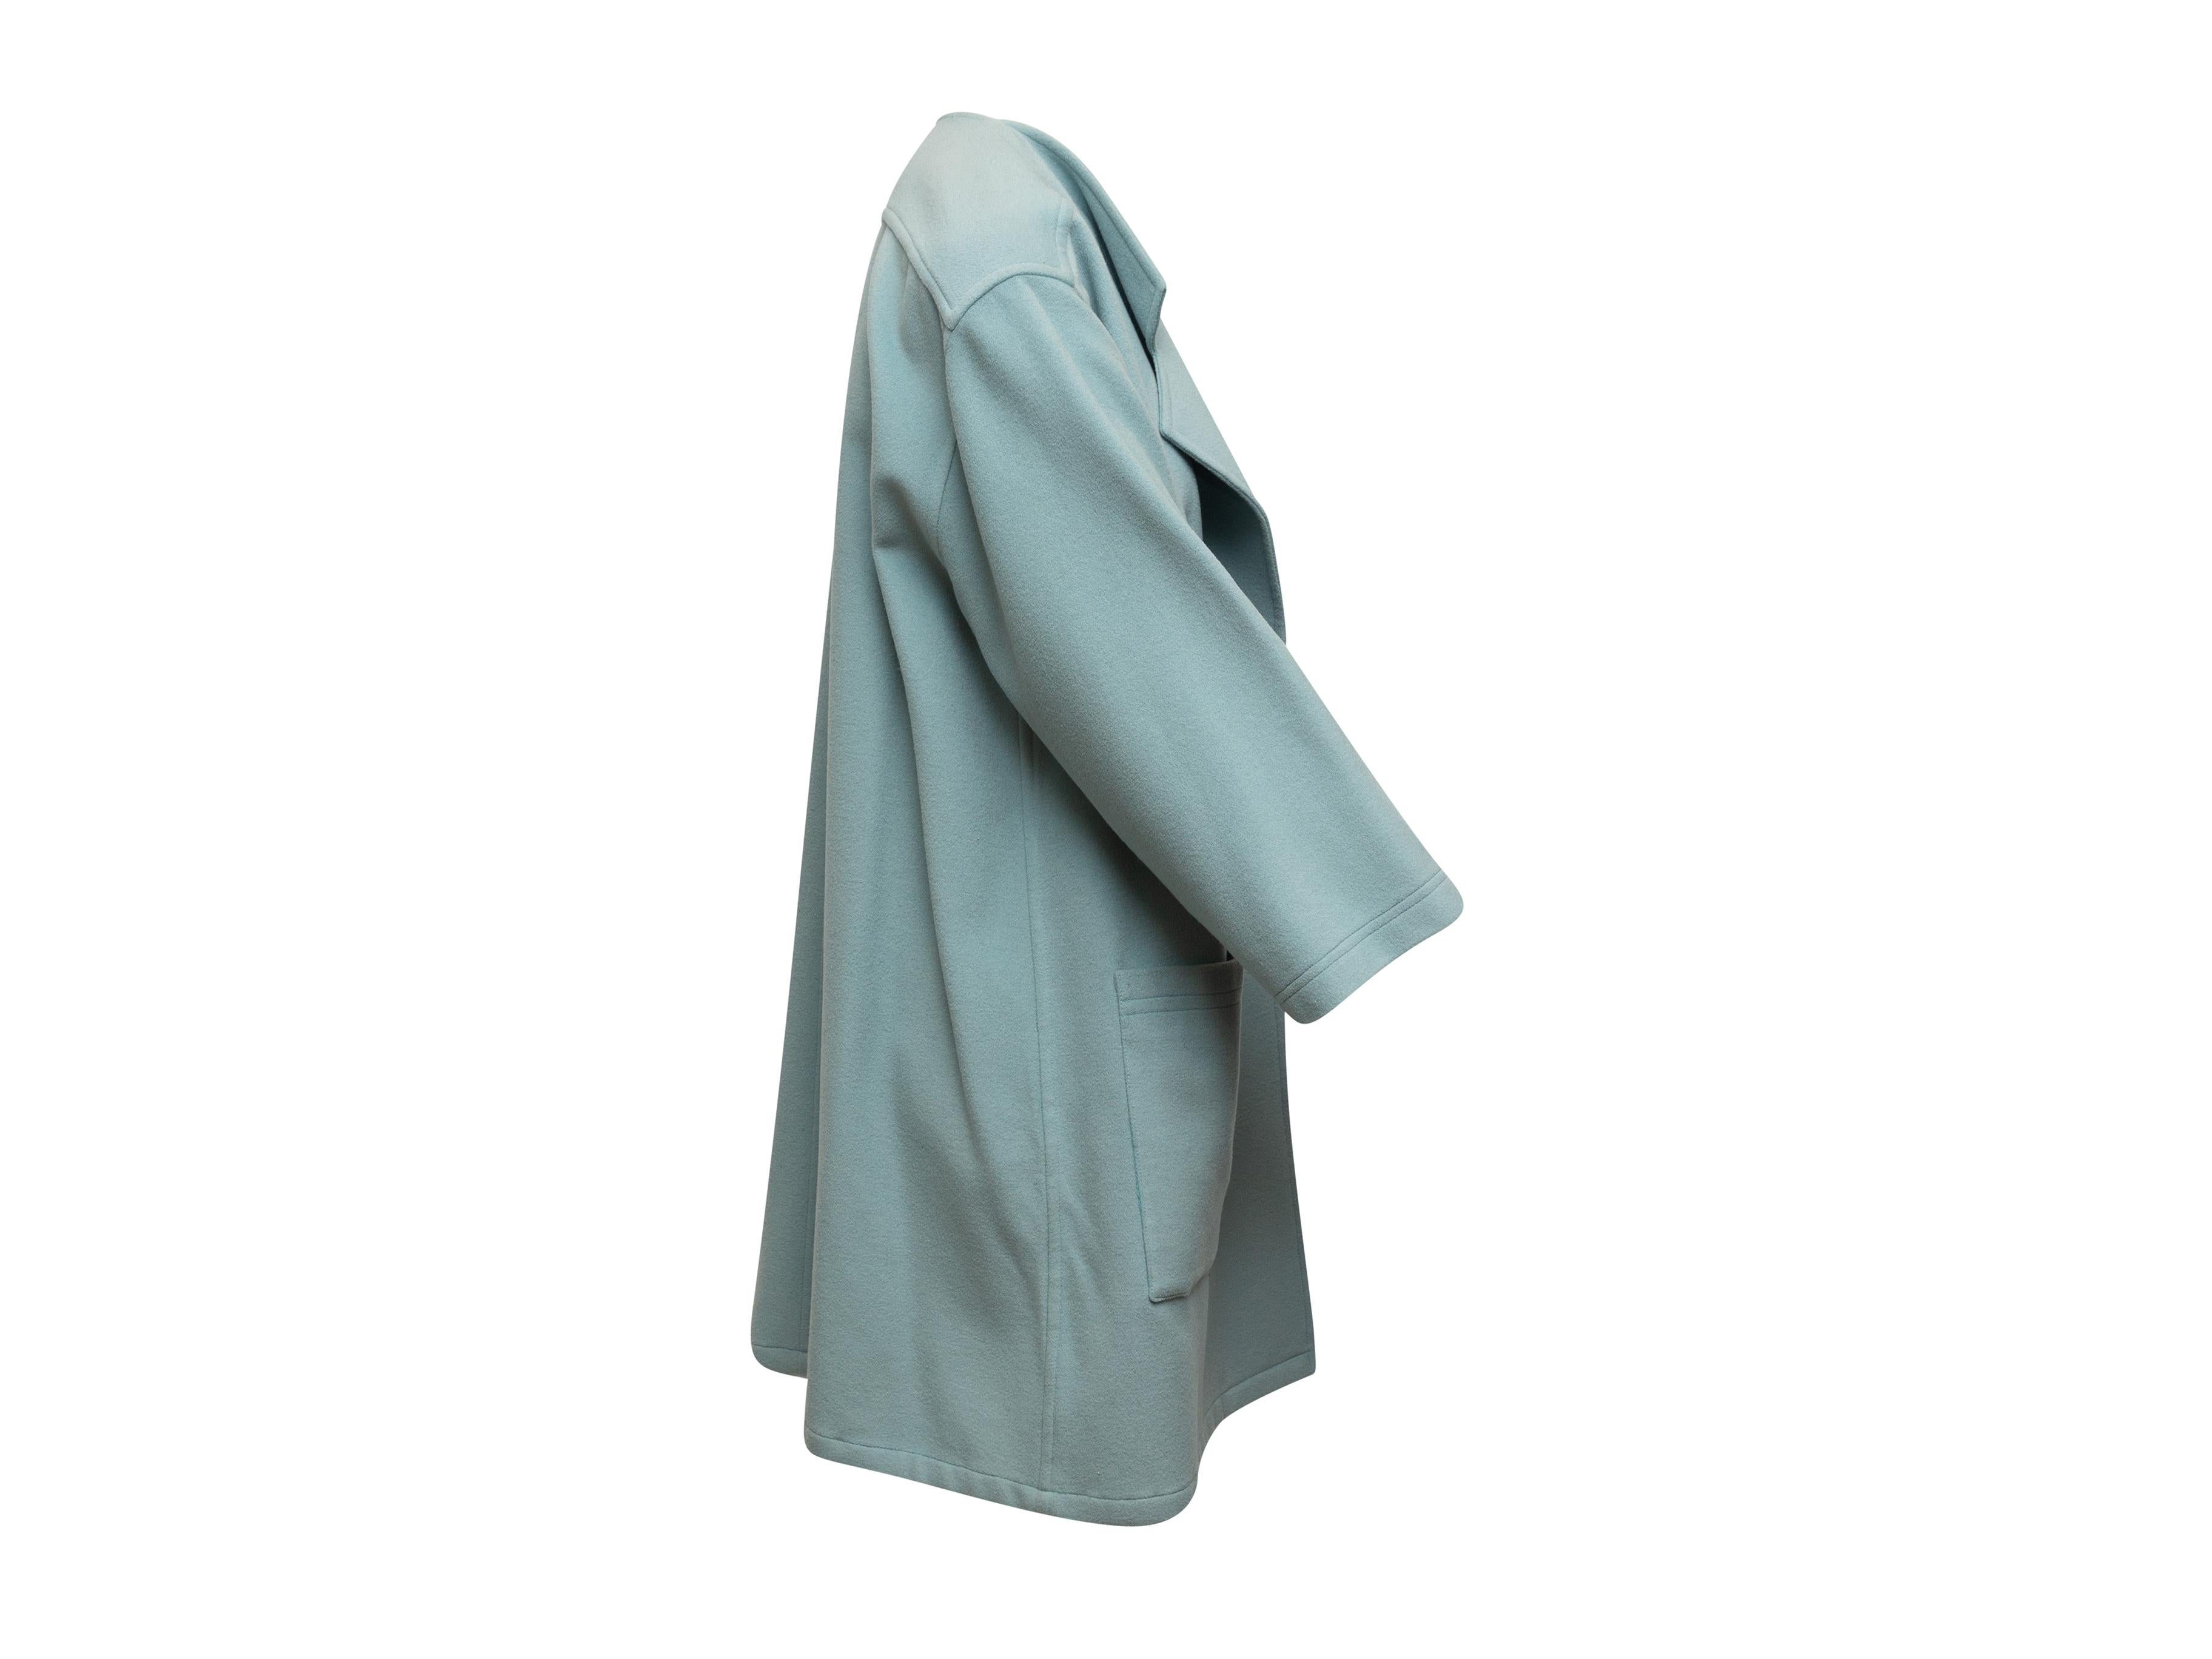 Product details: Vintage light blue wool coat by J. Tiktiner. Notched lapel. Dual patch pockets. Open front. 44